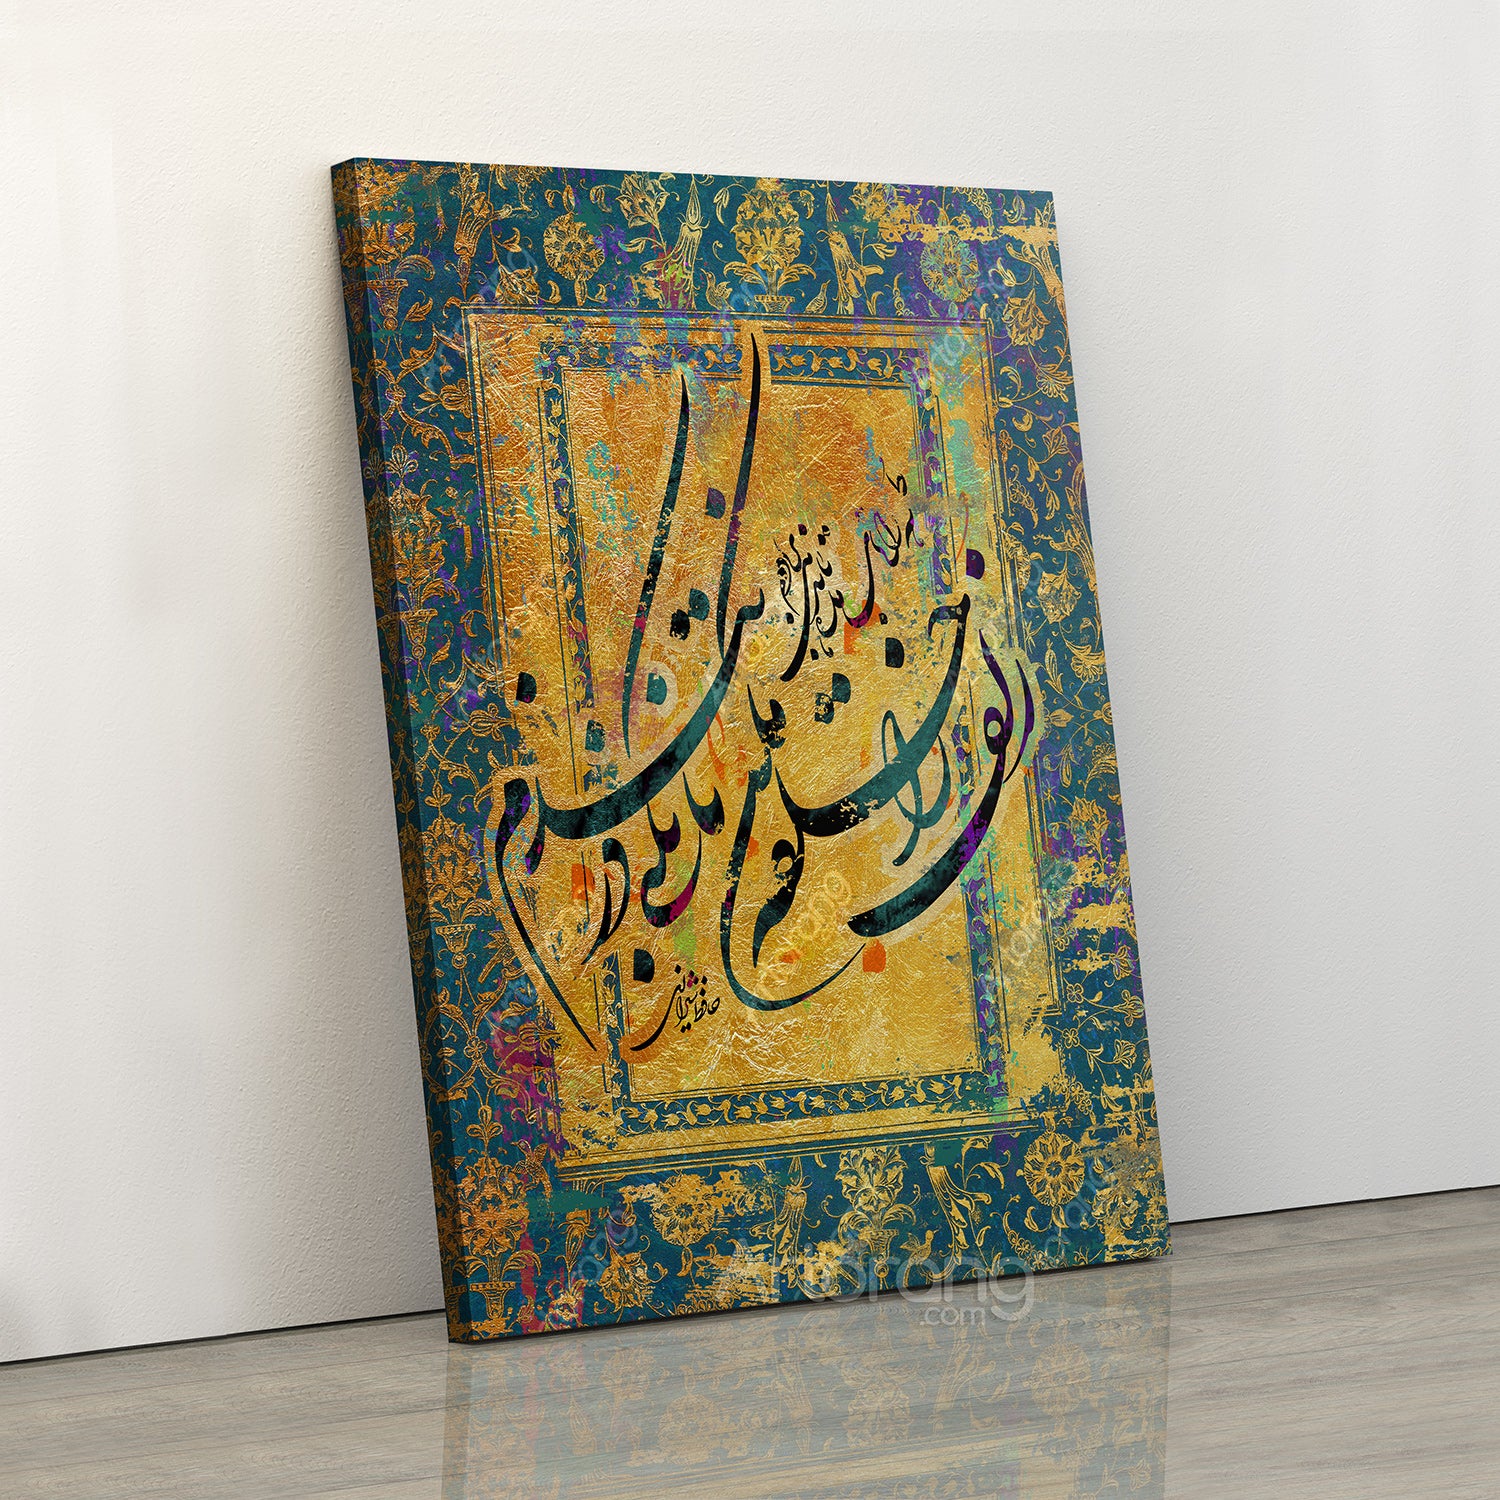 Curled like a chain, Persian calligraphy of Hafez poem on Persian bookbinding design, Persian gift